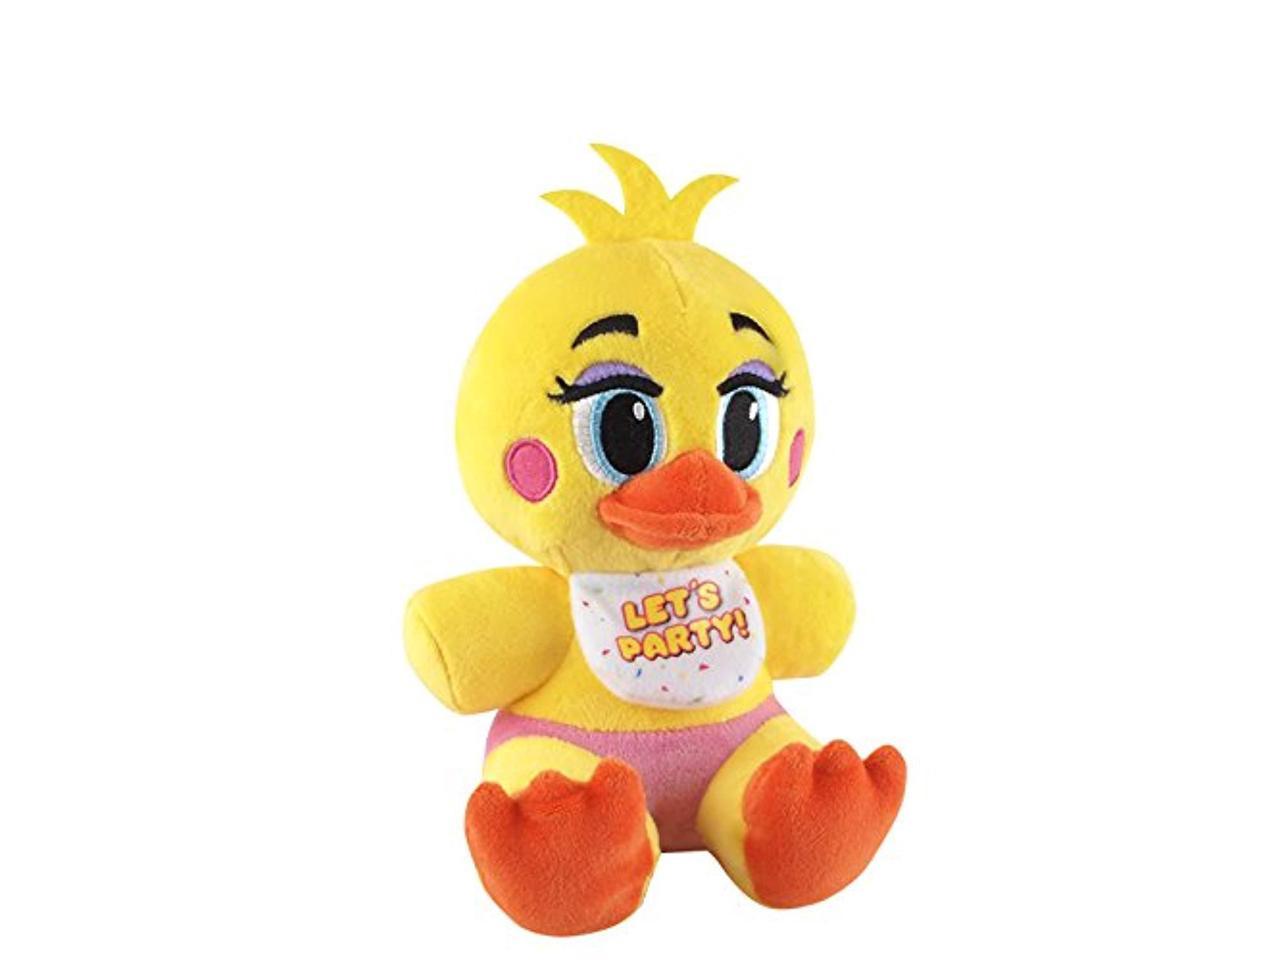 Funko Five Nights at Freddy's Toy Chica Plush, 6